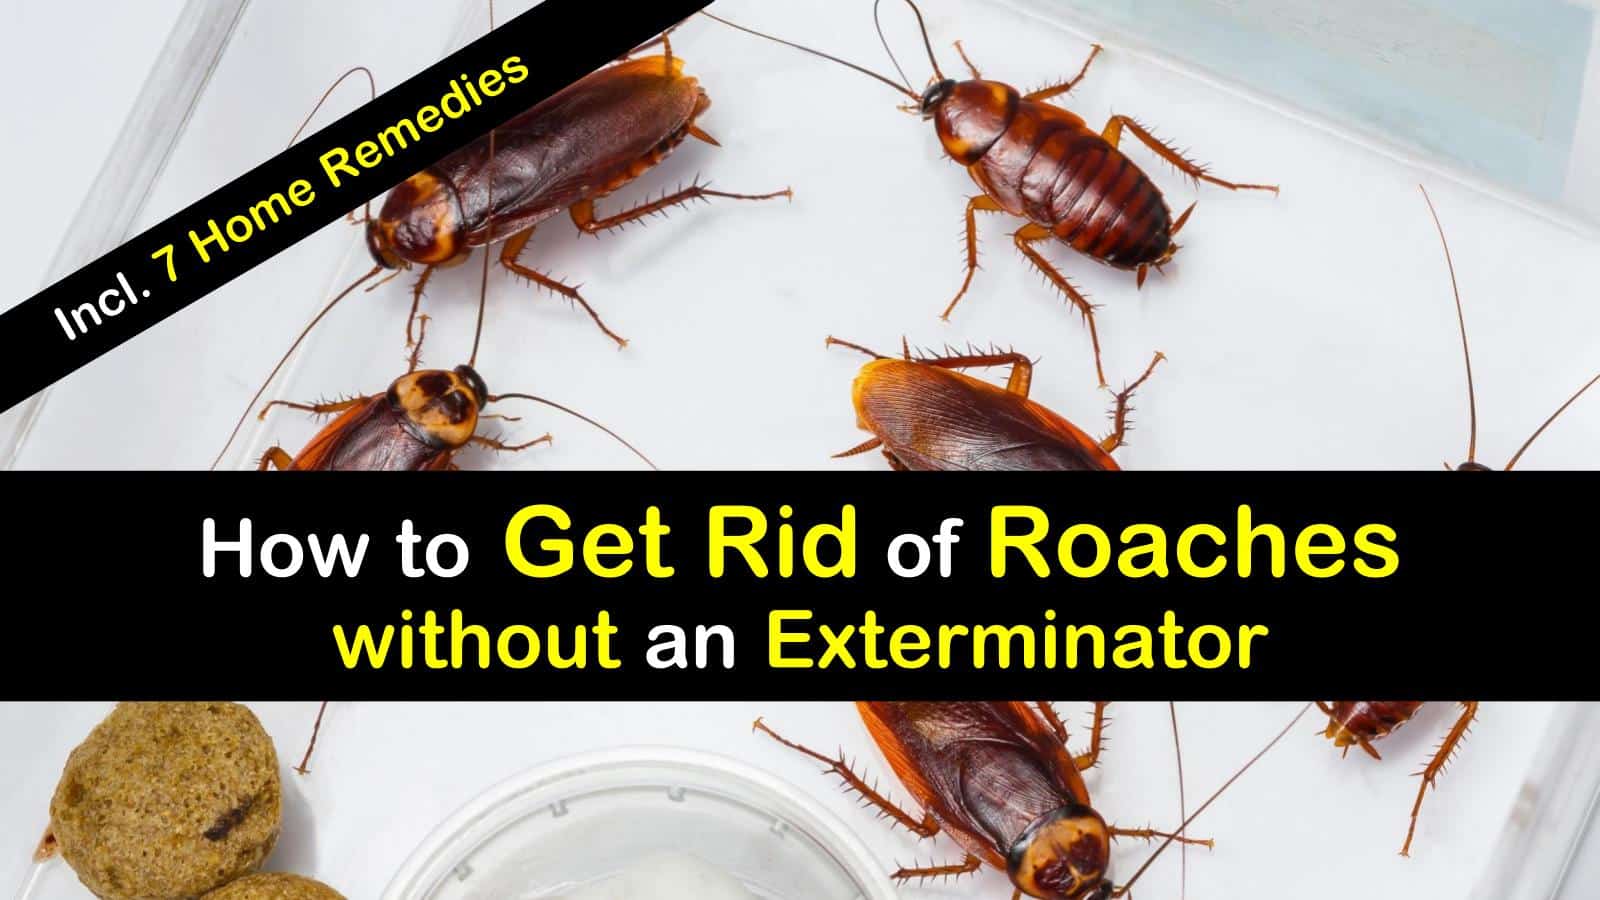 roaches rid exterminator remedies without ways come cockroaches way tipsbulletin getting pest control infestation kill simple super natural household common